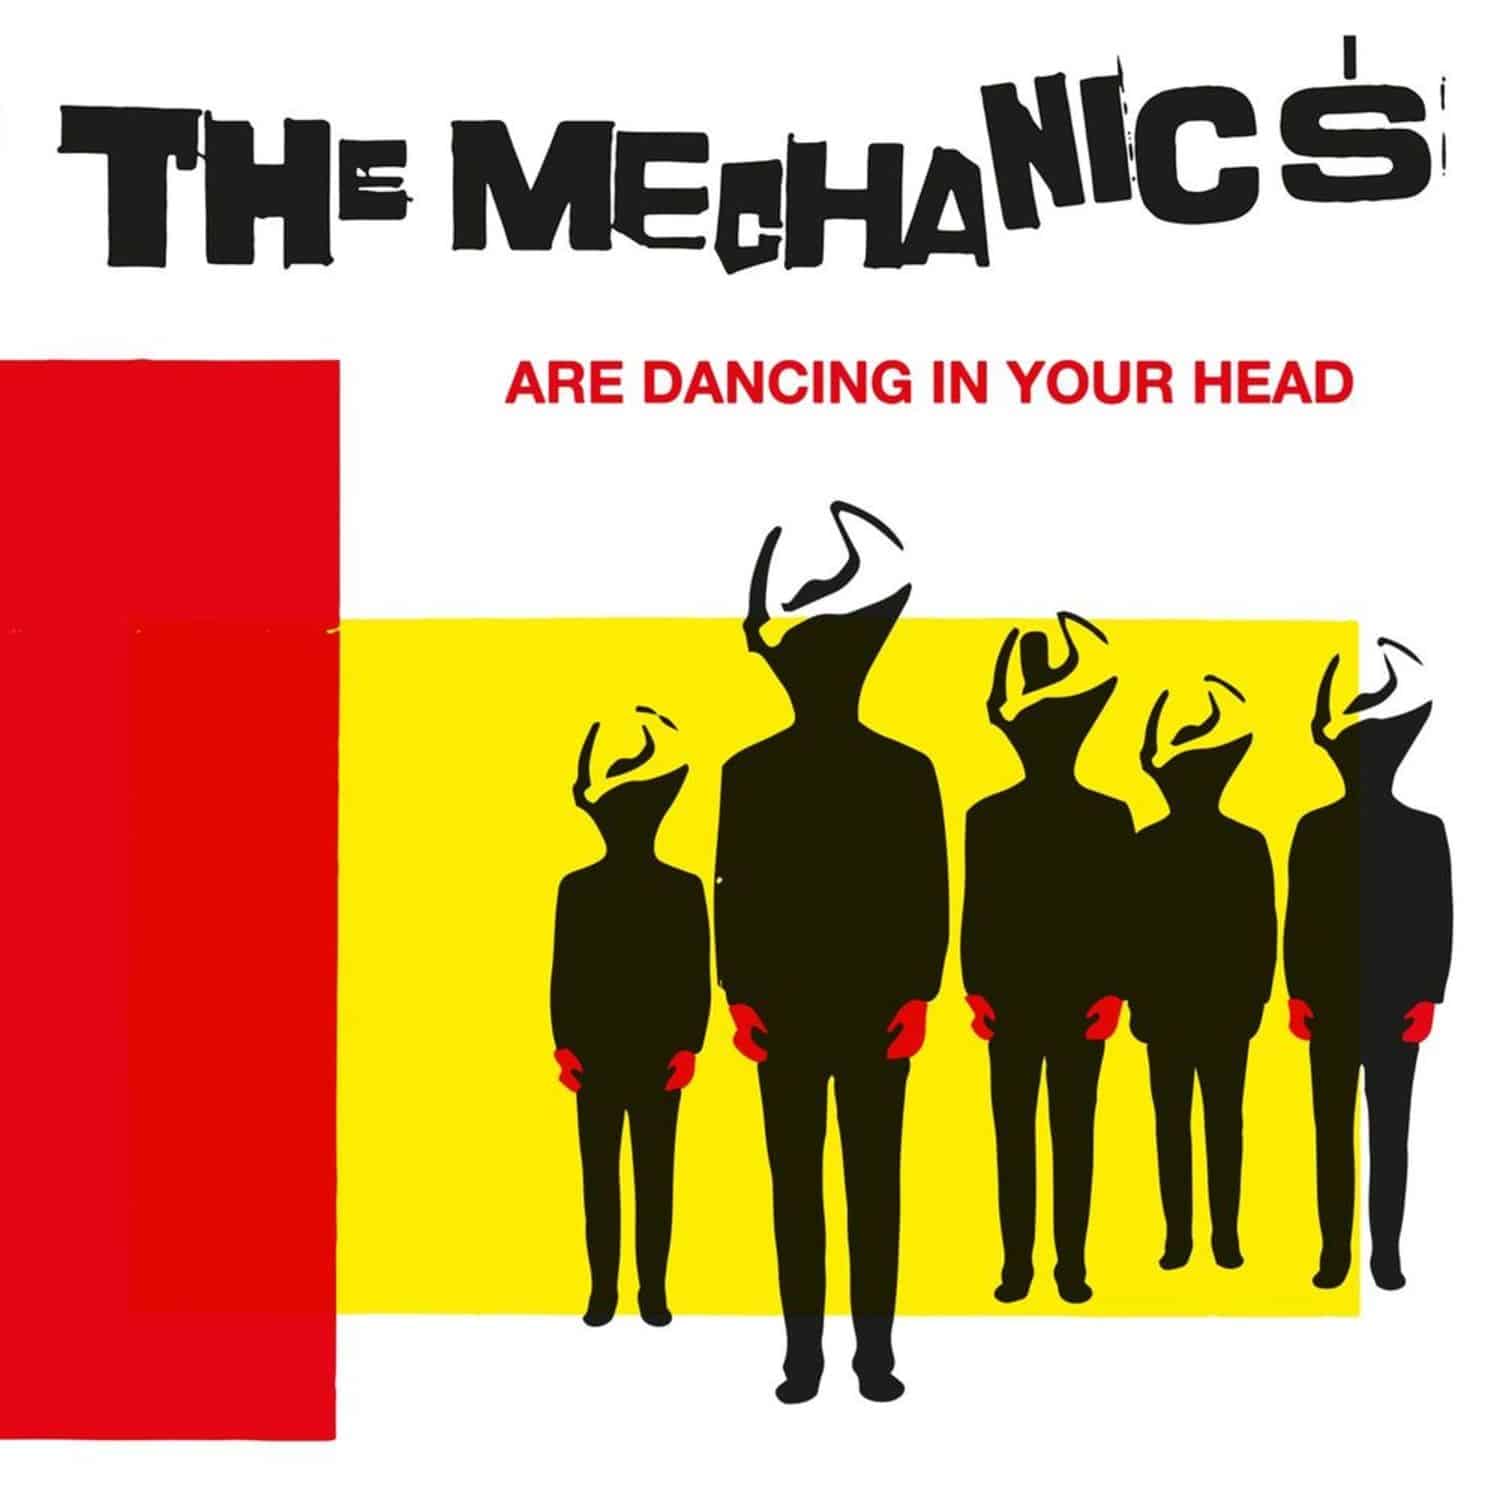 The Mechanics - THE MECHANICS ARE DANCING IN OUR HEAD